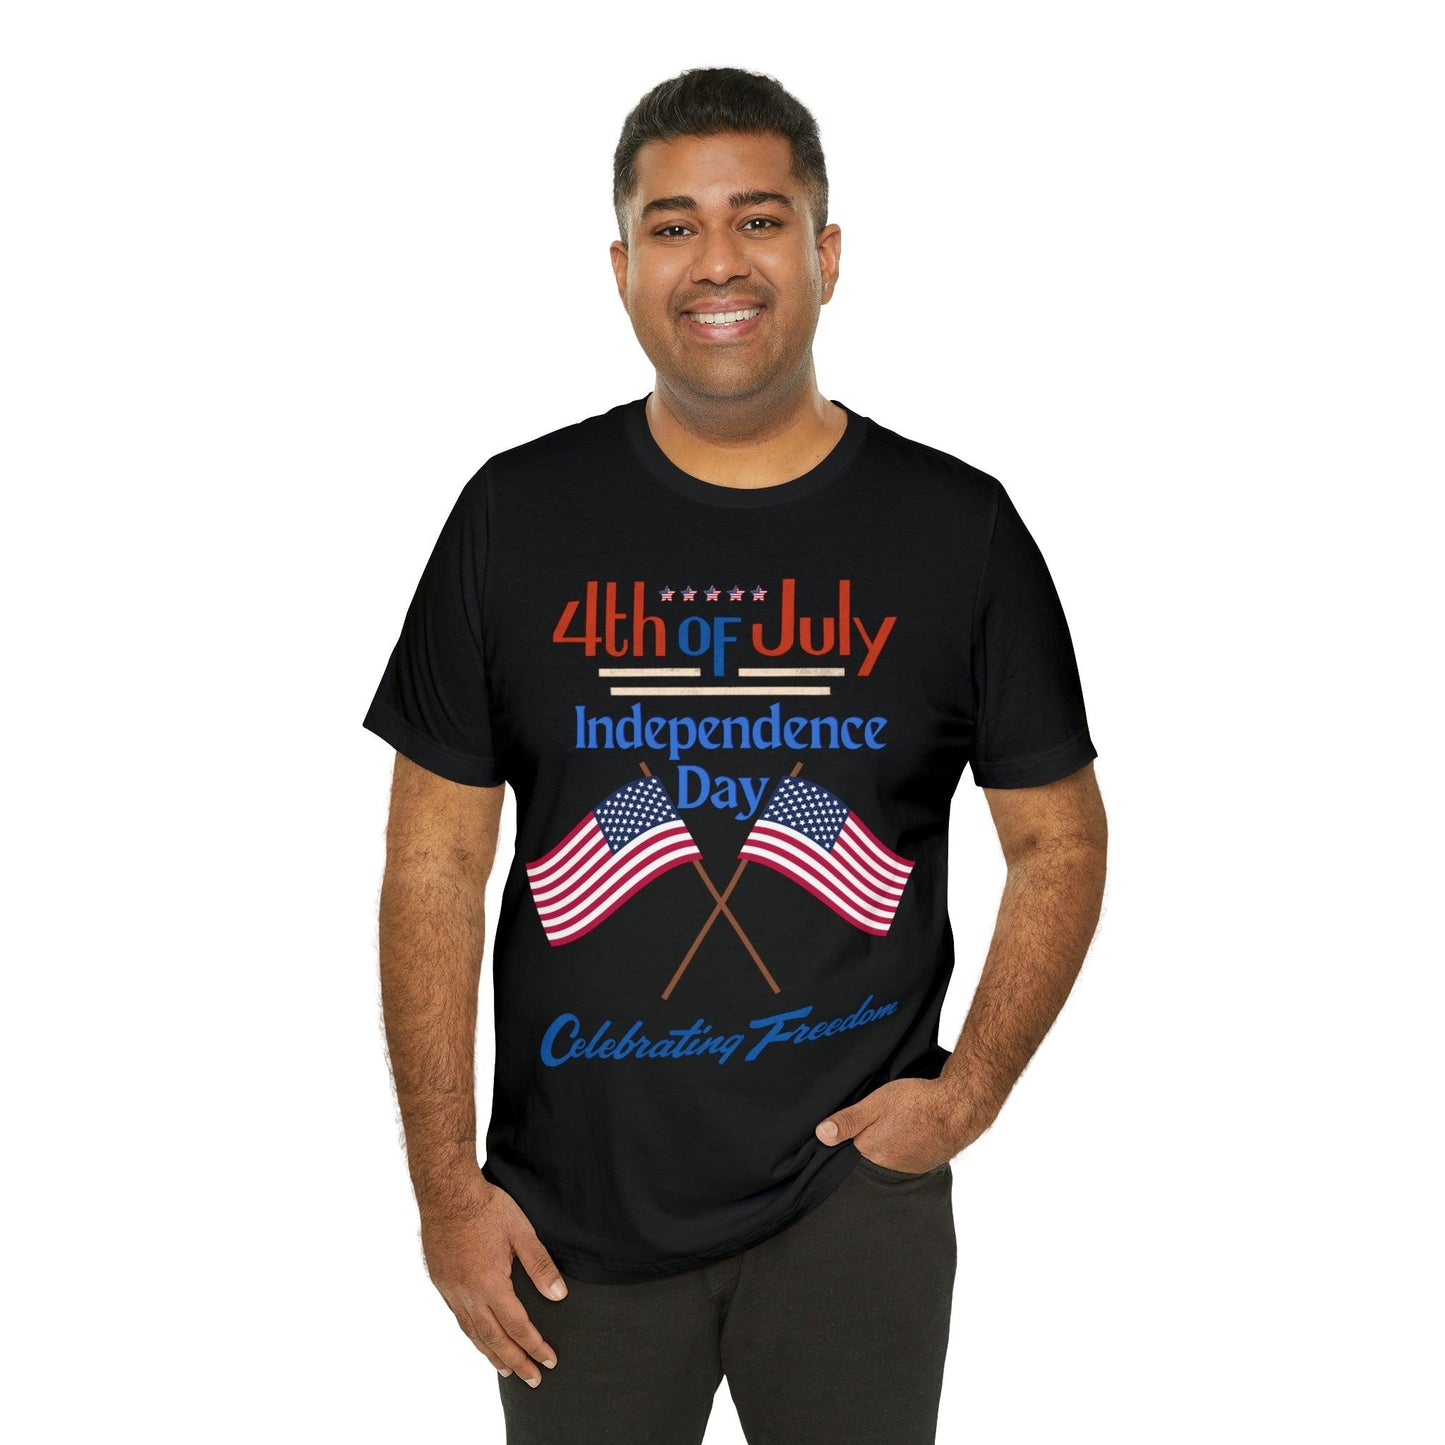 Express Your Patriotism with 4th of July Flag Shirt: Independence Day, Fireworks, Celebrating Freedom - Perfect for Women and Men - Giftsmojo